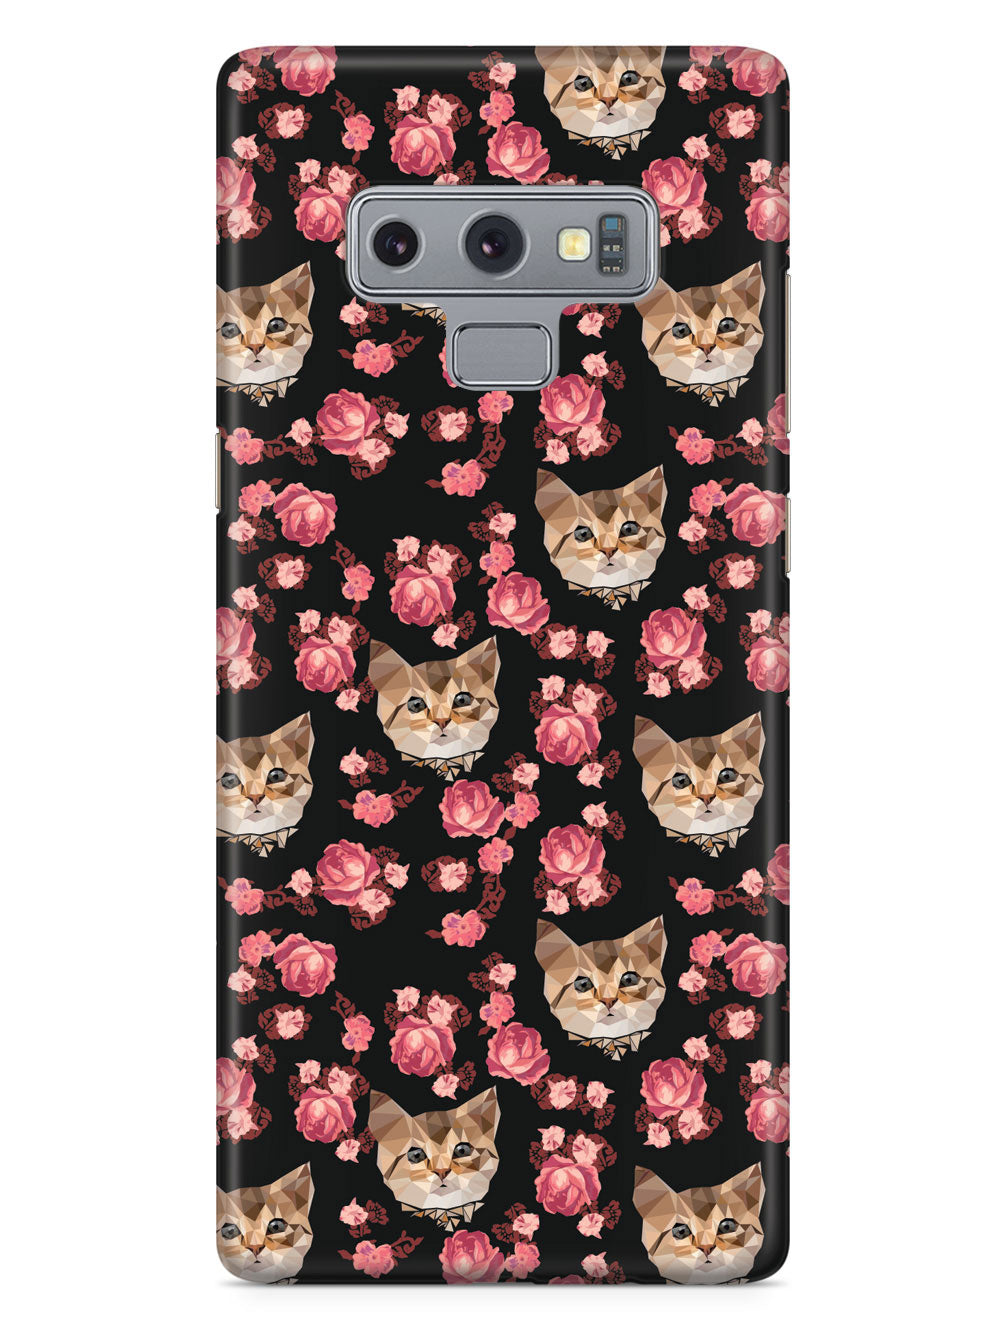 Roses and Kittens Pattern - Black Case